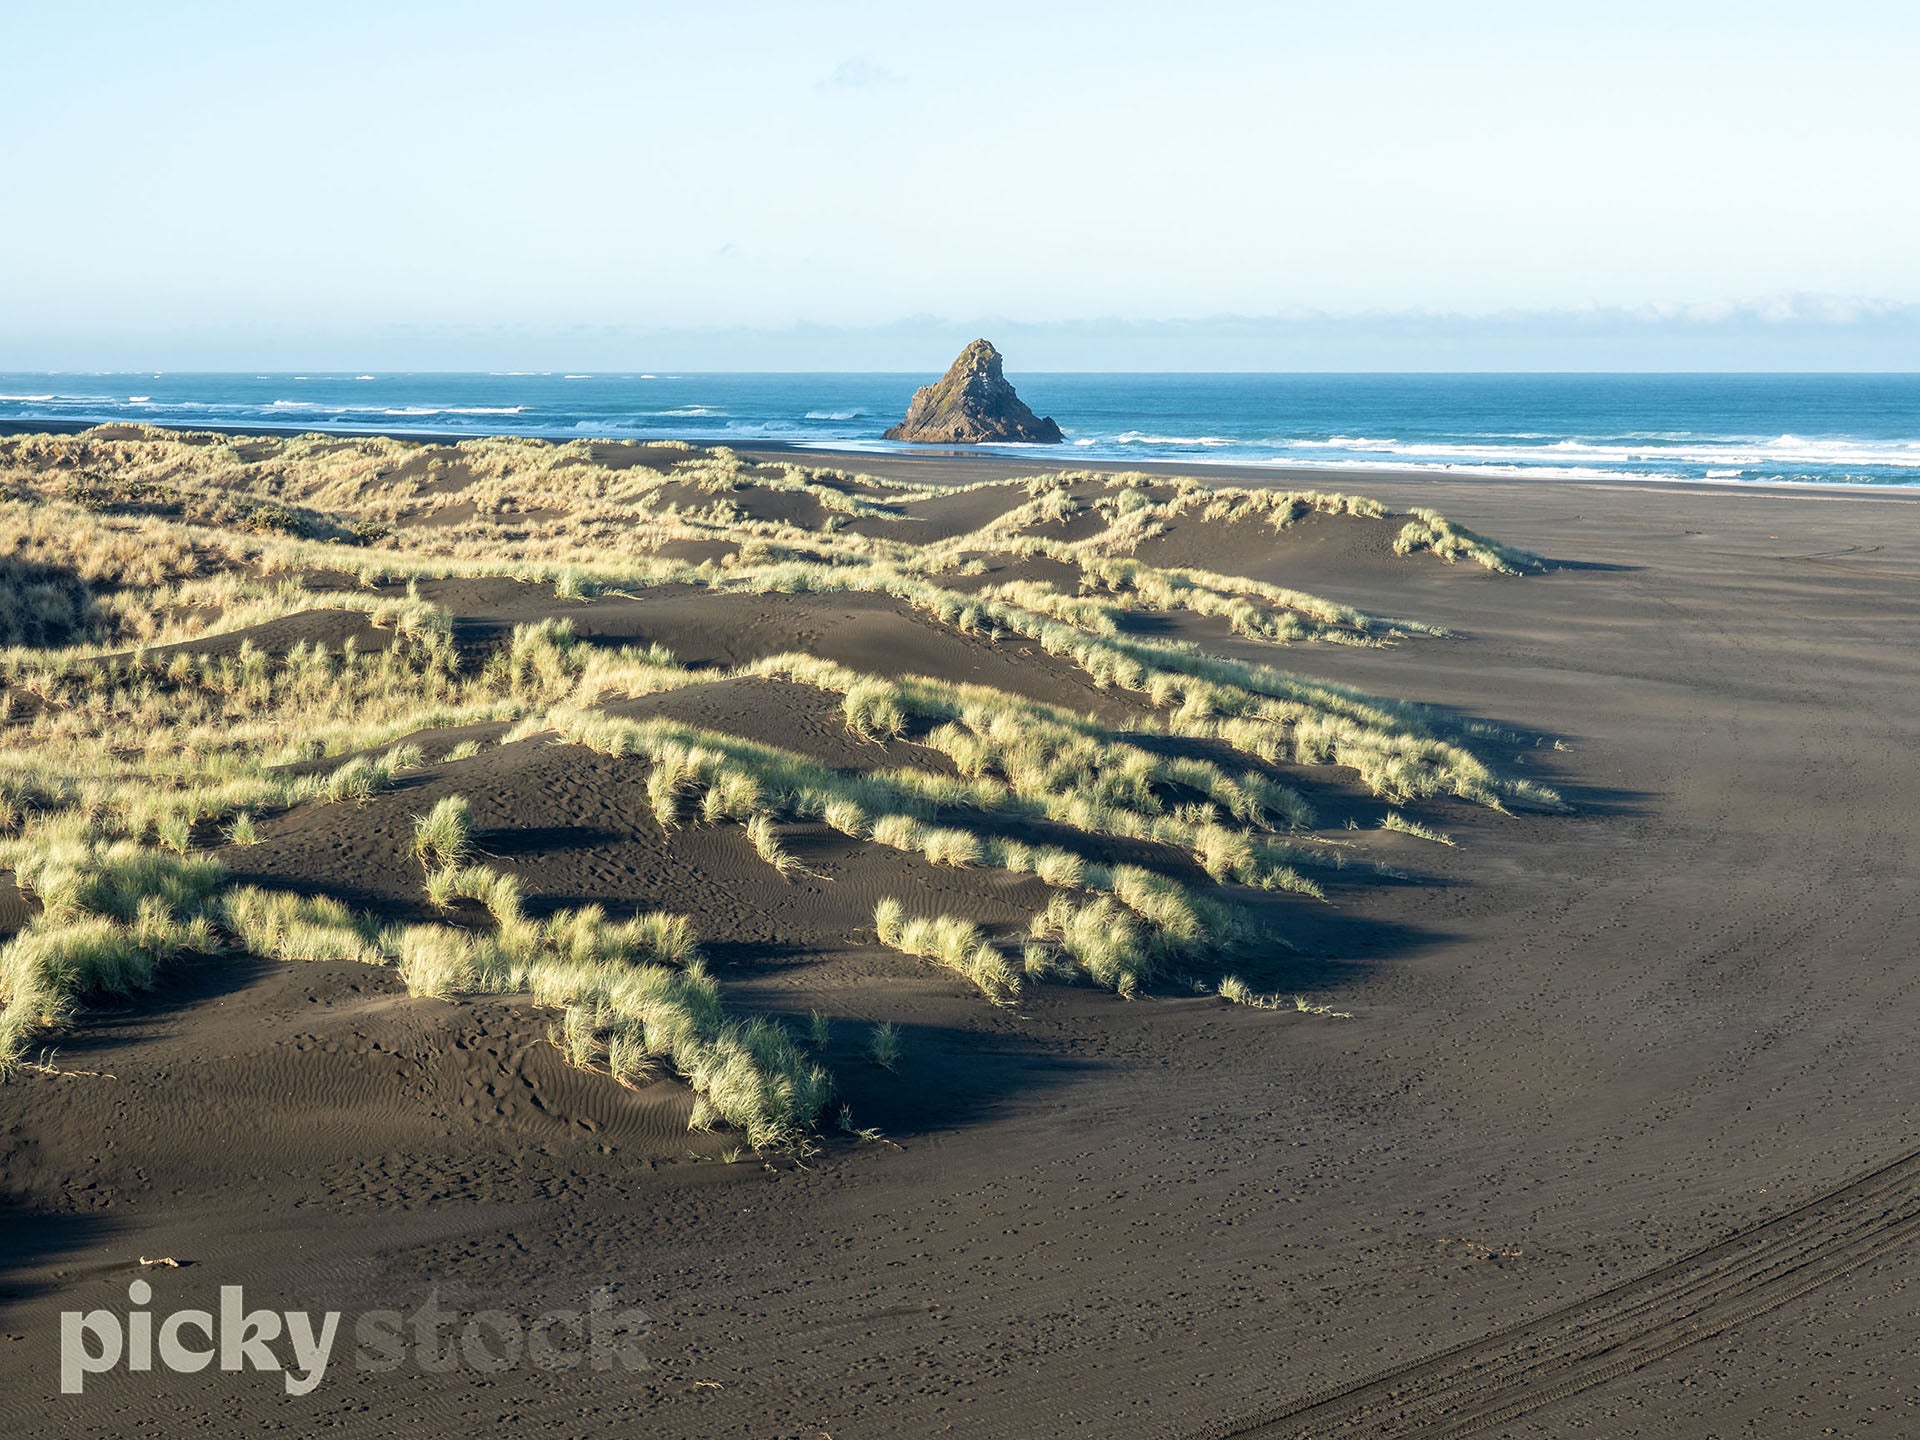 Views over the black sand dunes at Karekare beach looking out to ocean.